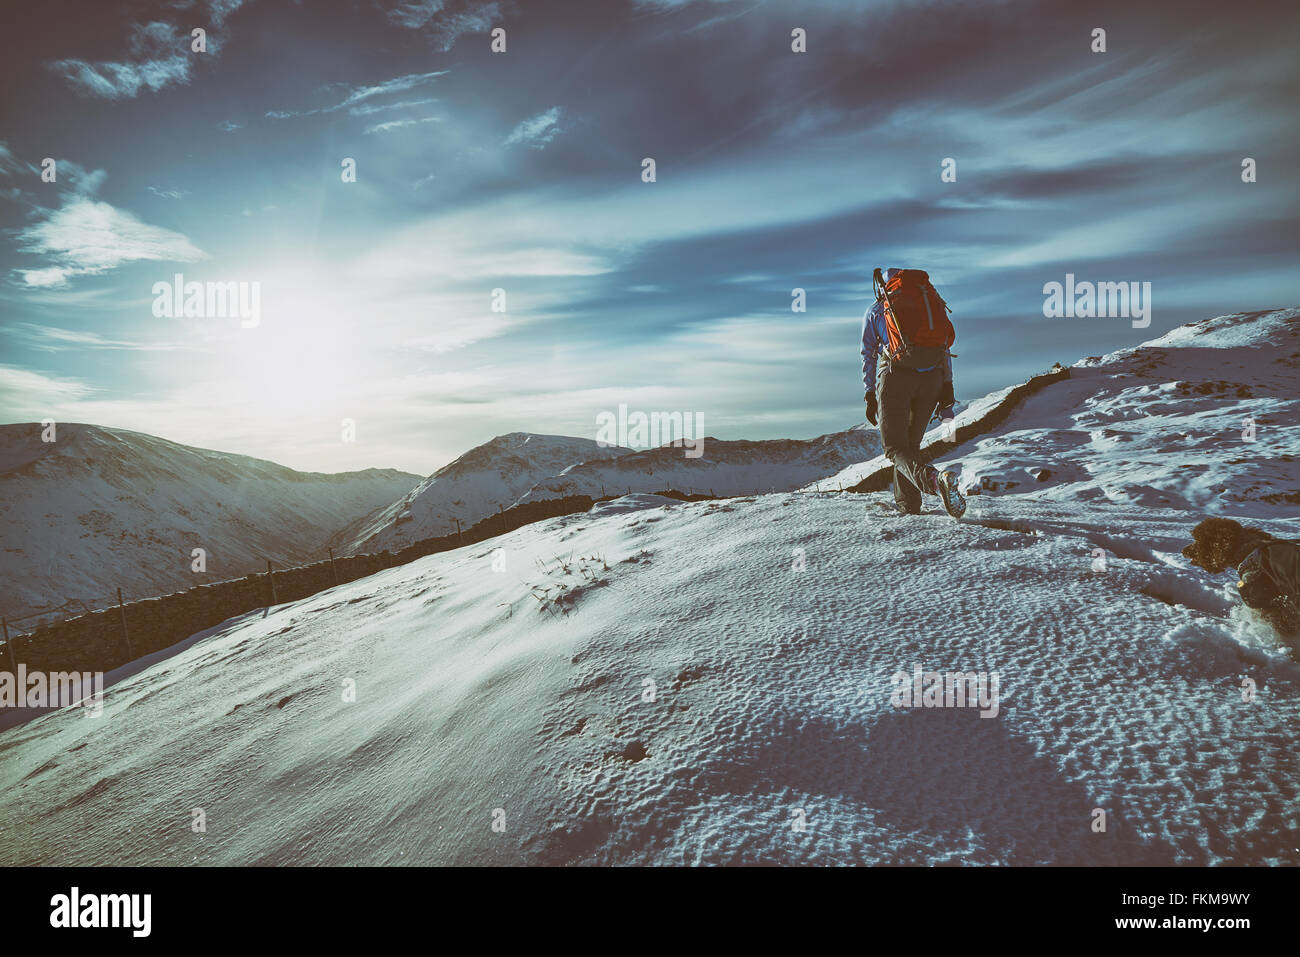 Hiker walking their dog over snow covered mountains in the UK. Grain and colour styling applied Stock Photo